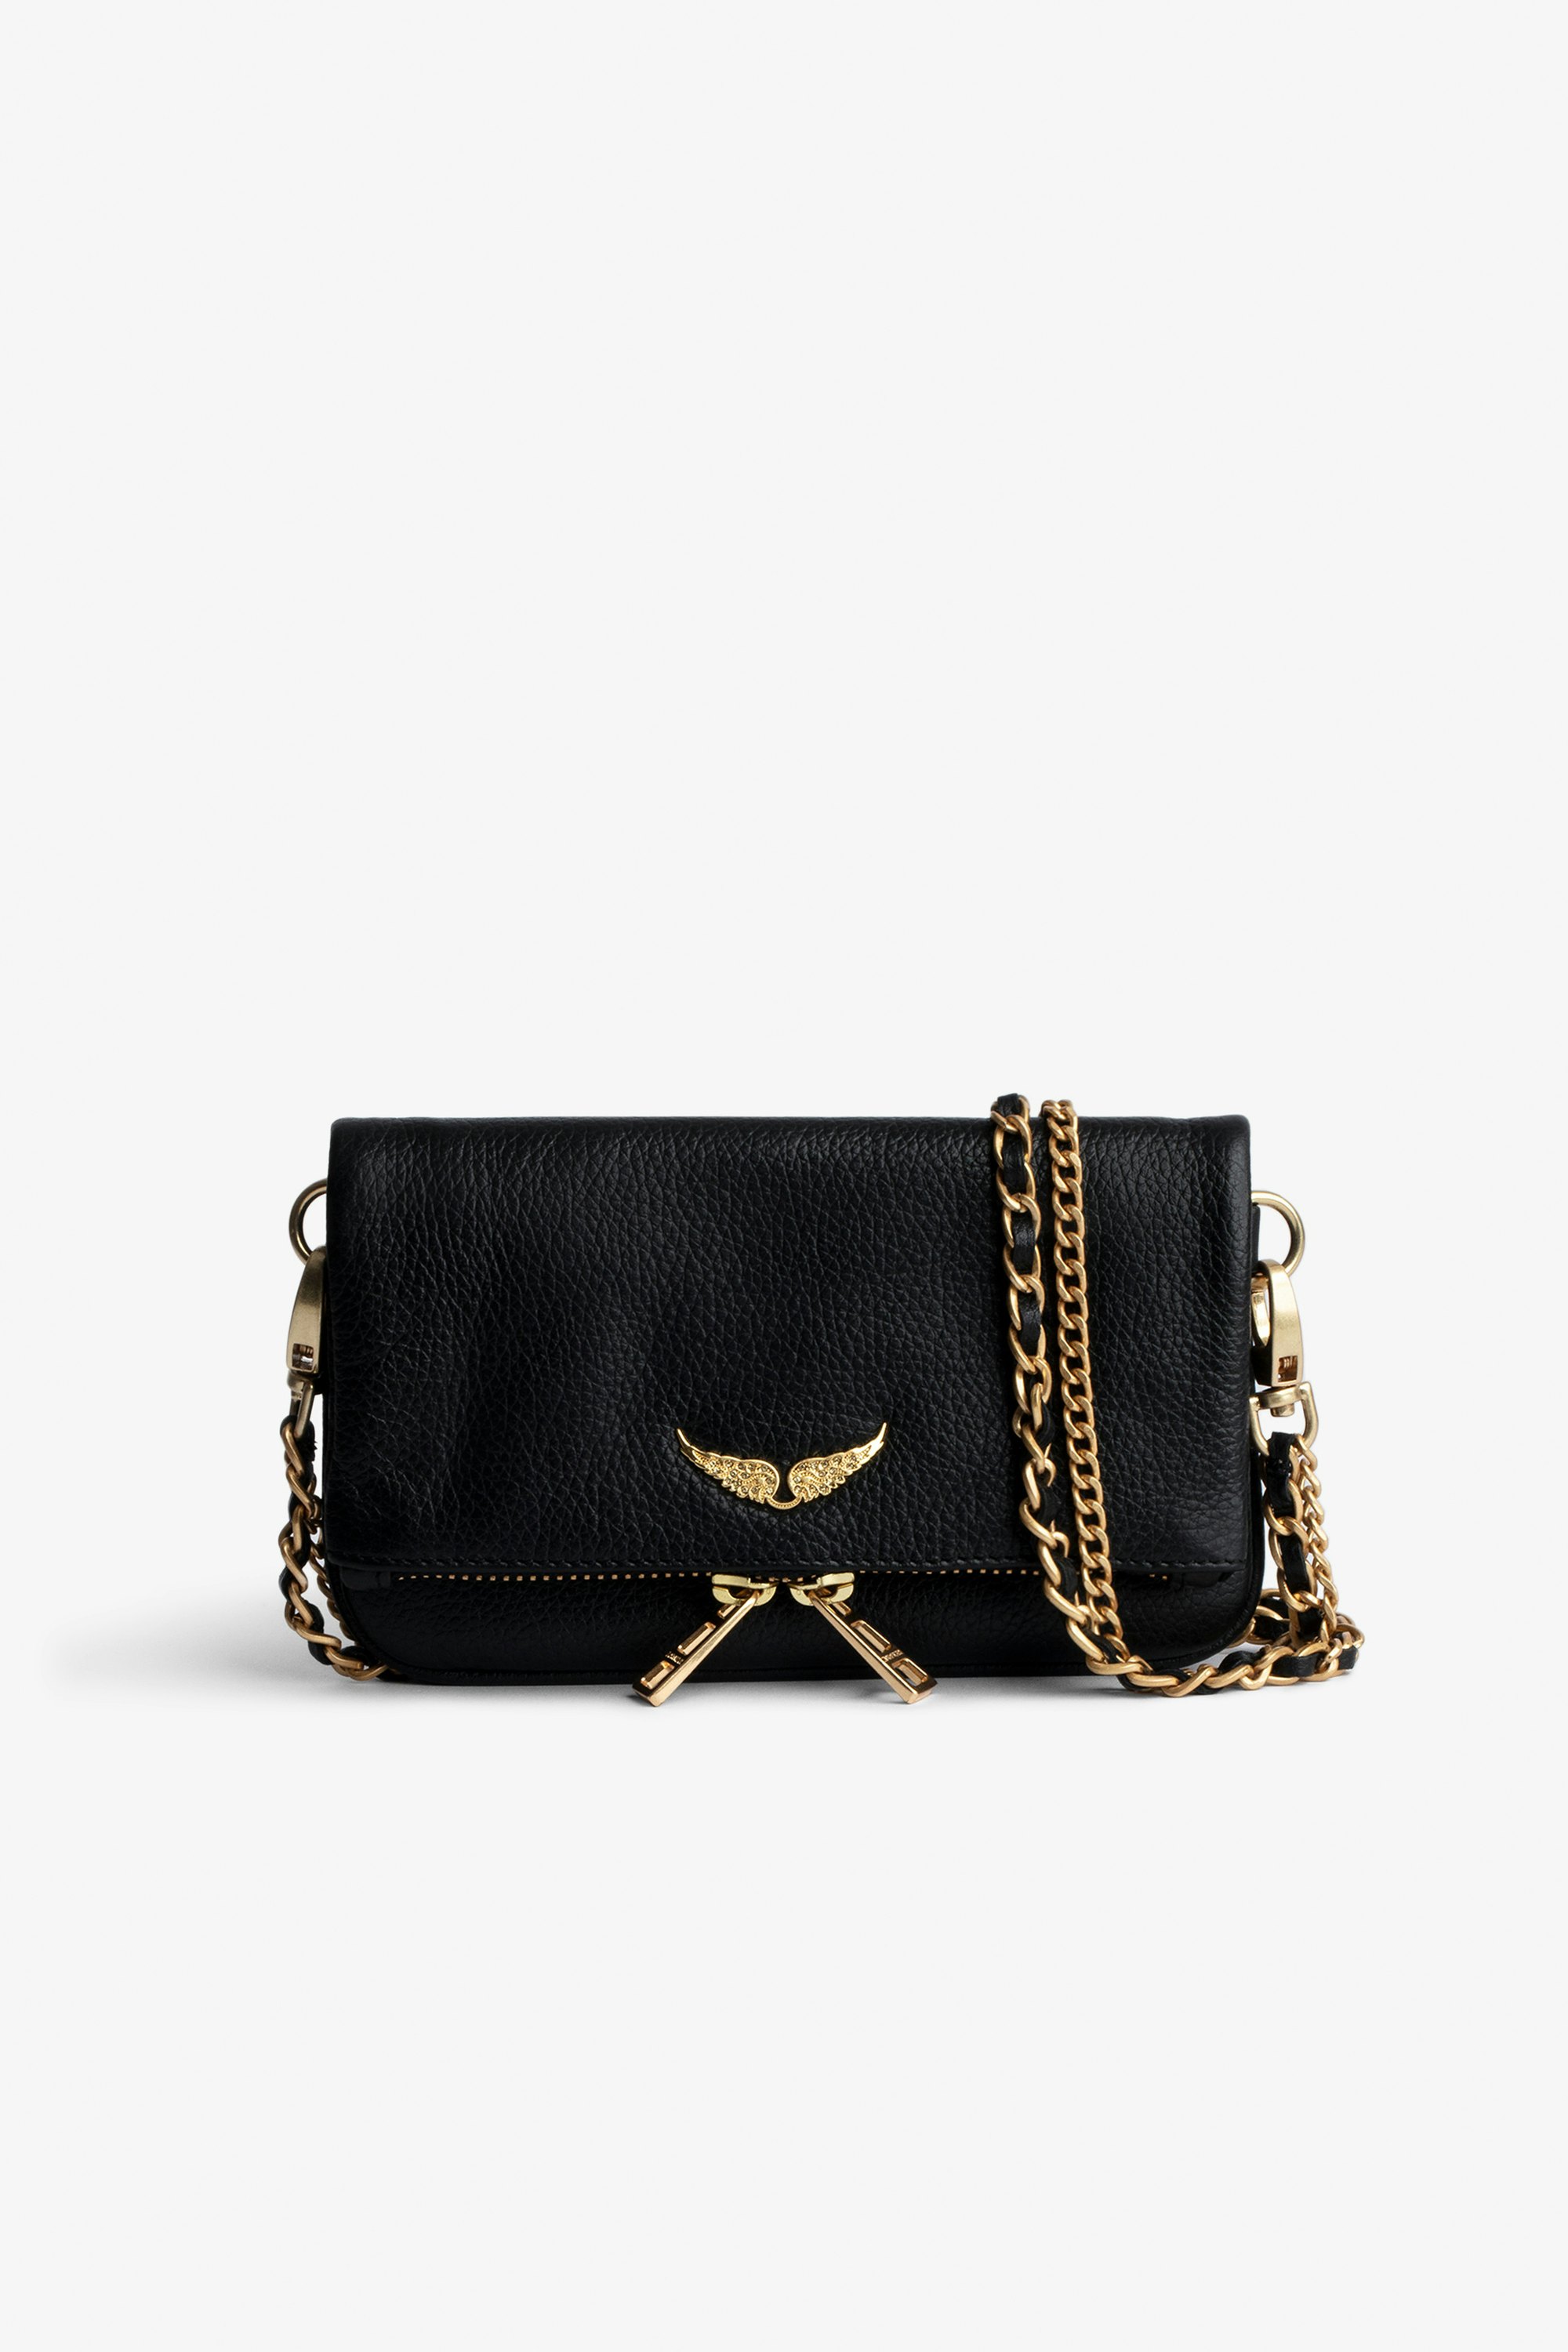 Rock Clutch Women’s black grained leather Rock Nano clutch with leather shoulder strap and gold-toned chain